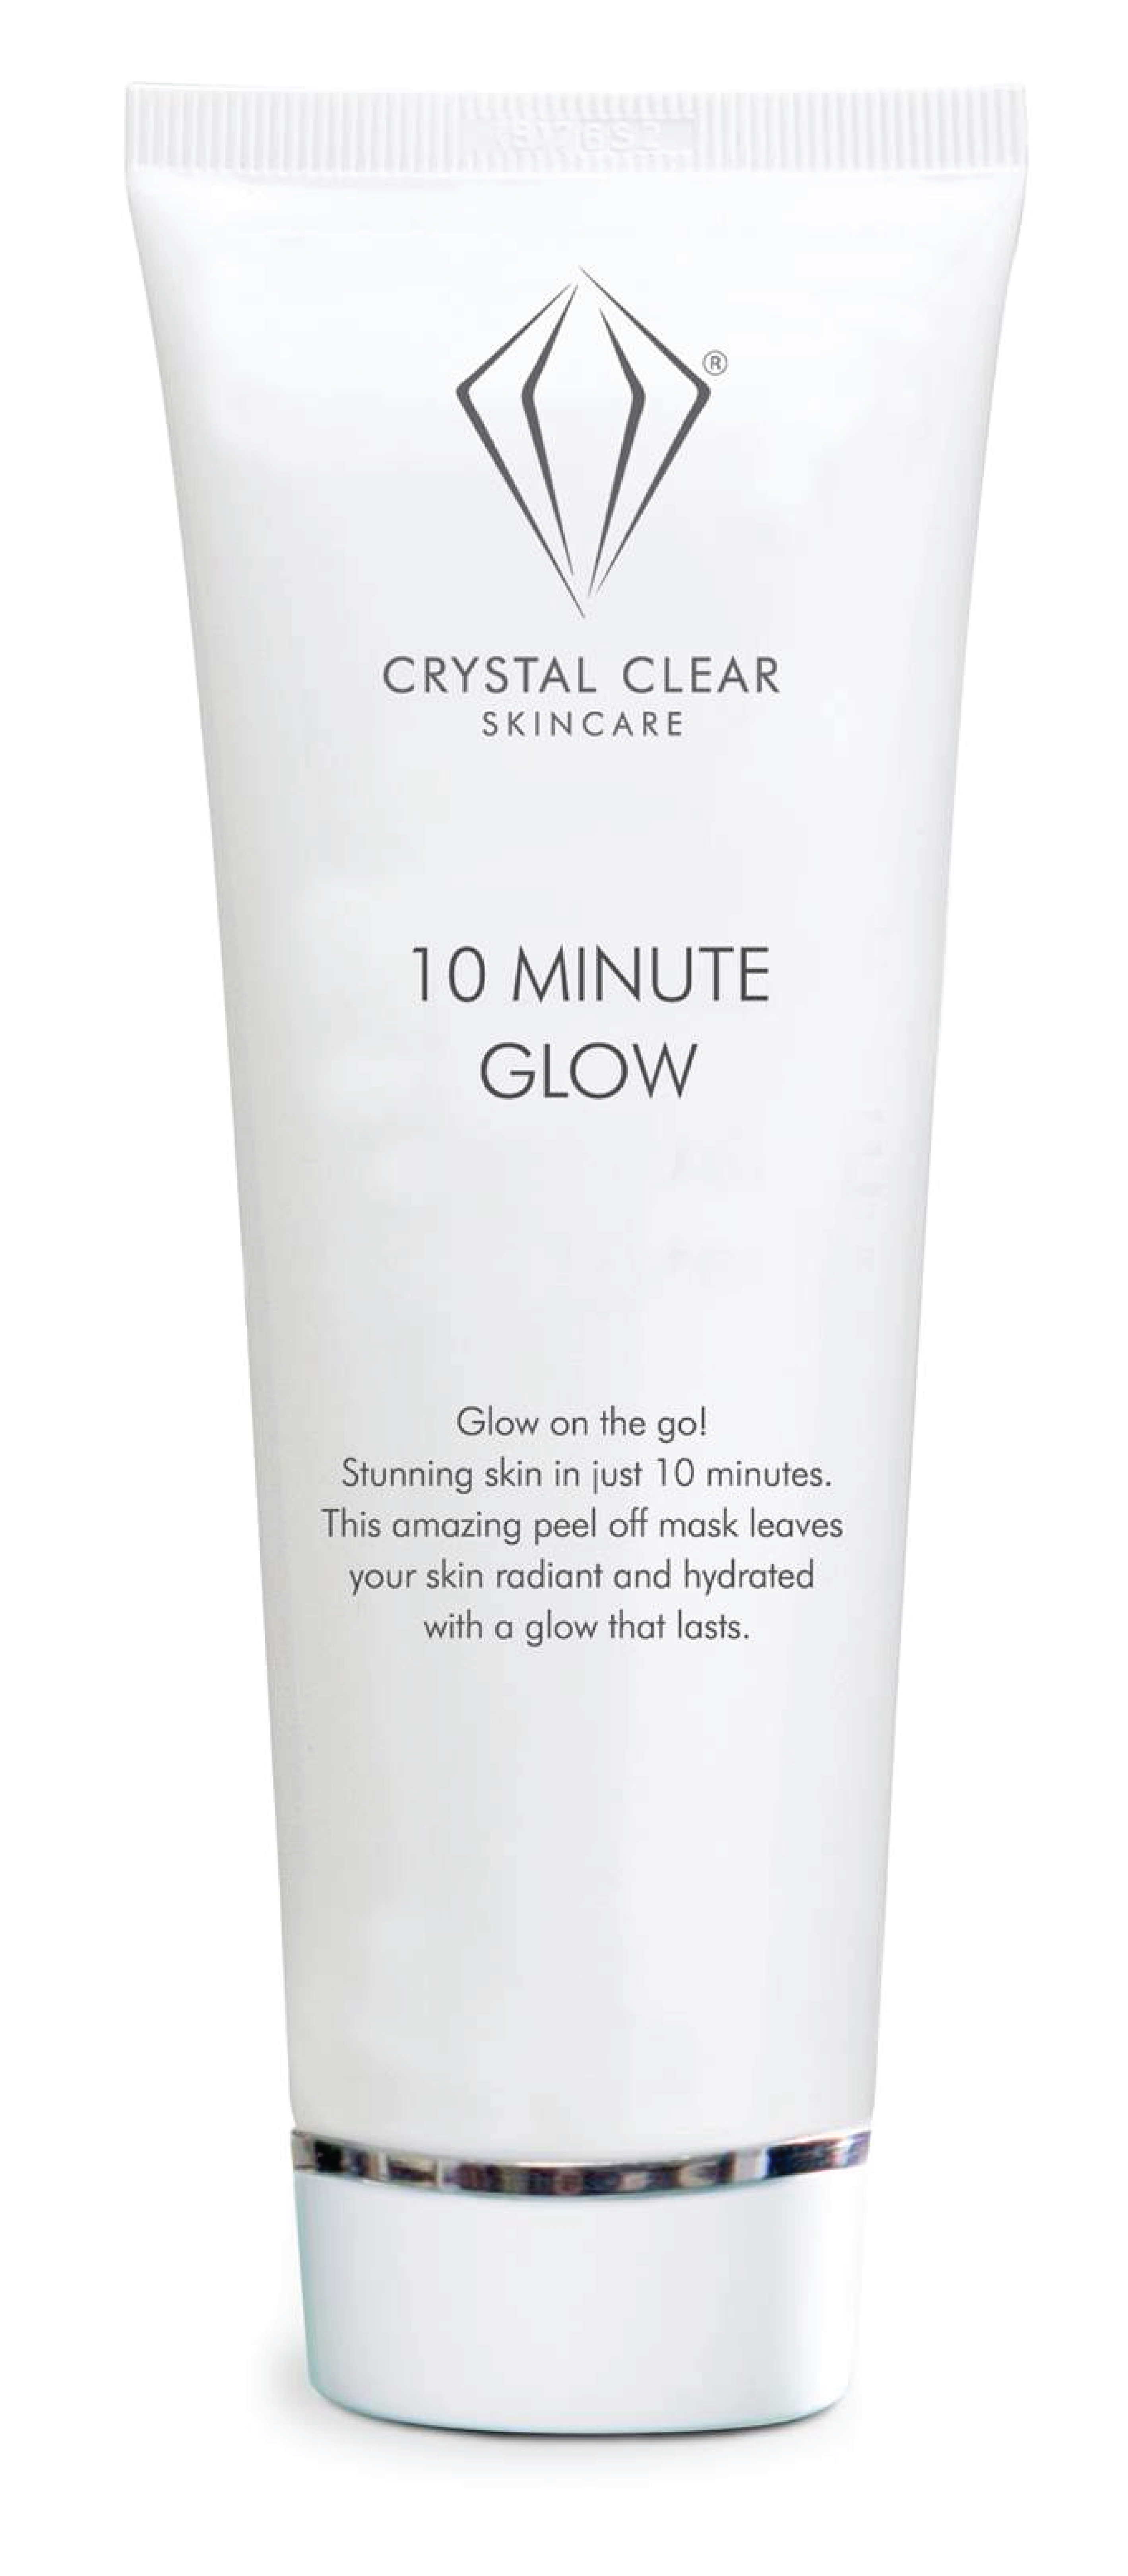 Crystal Clear's 10 Minute Glow 